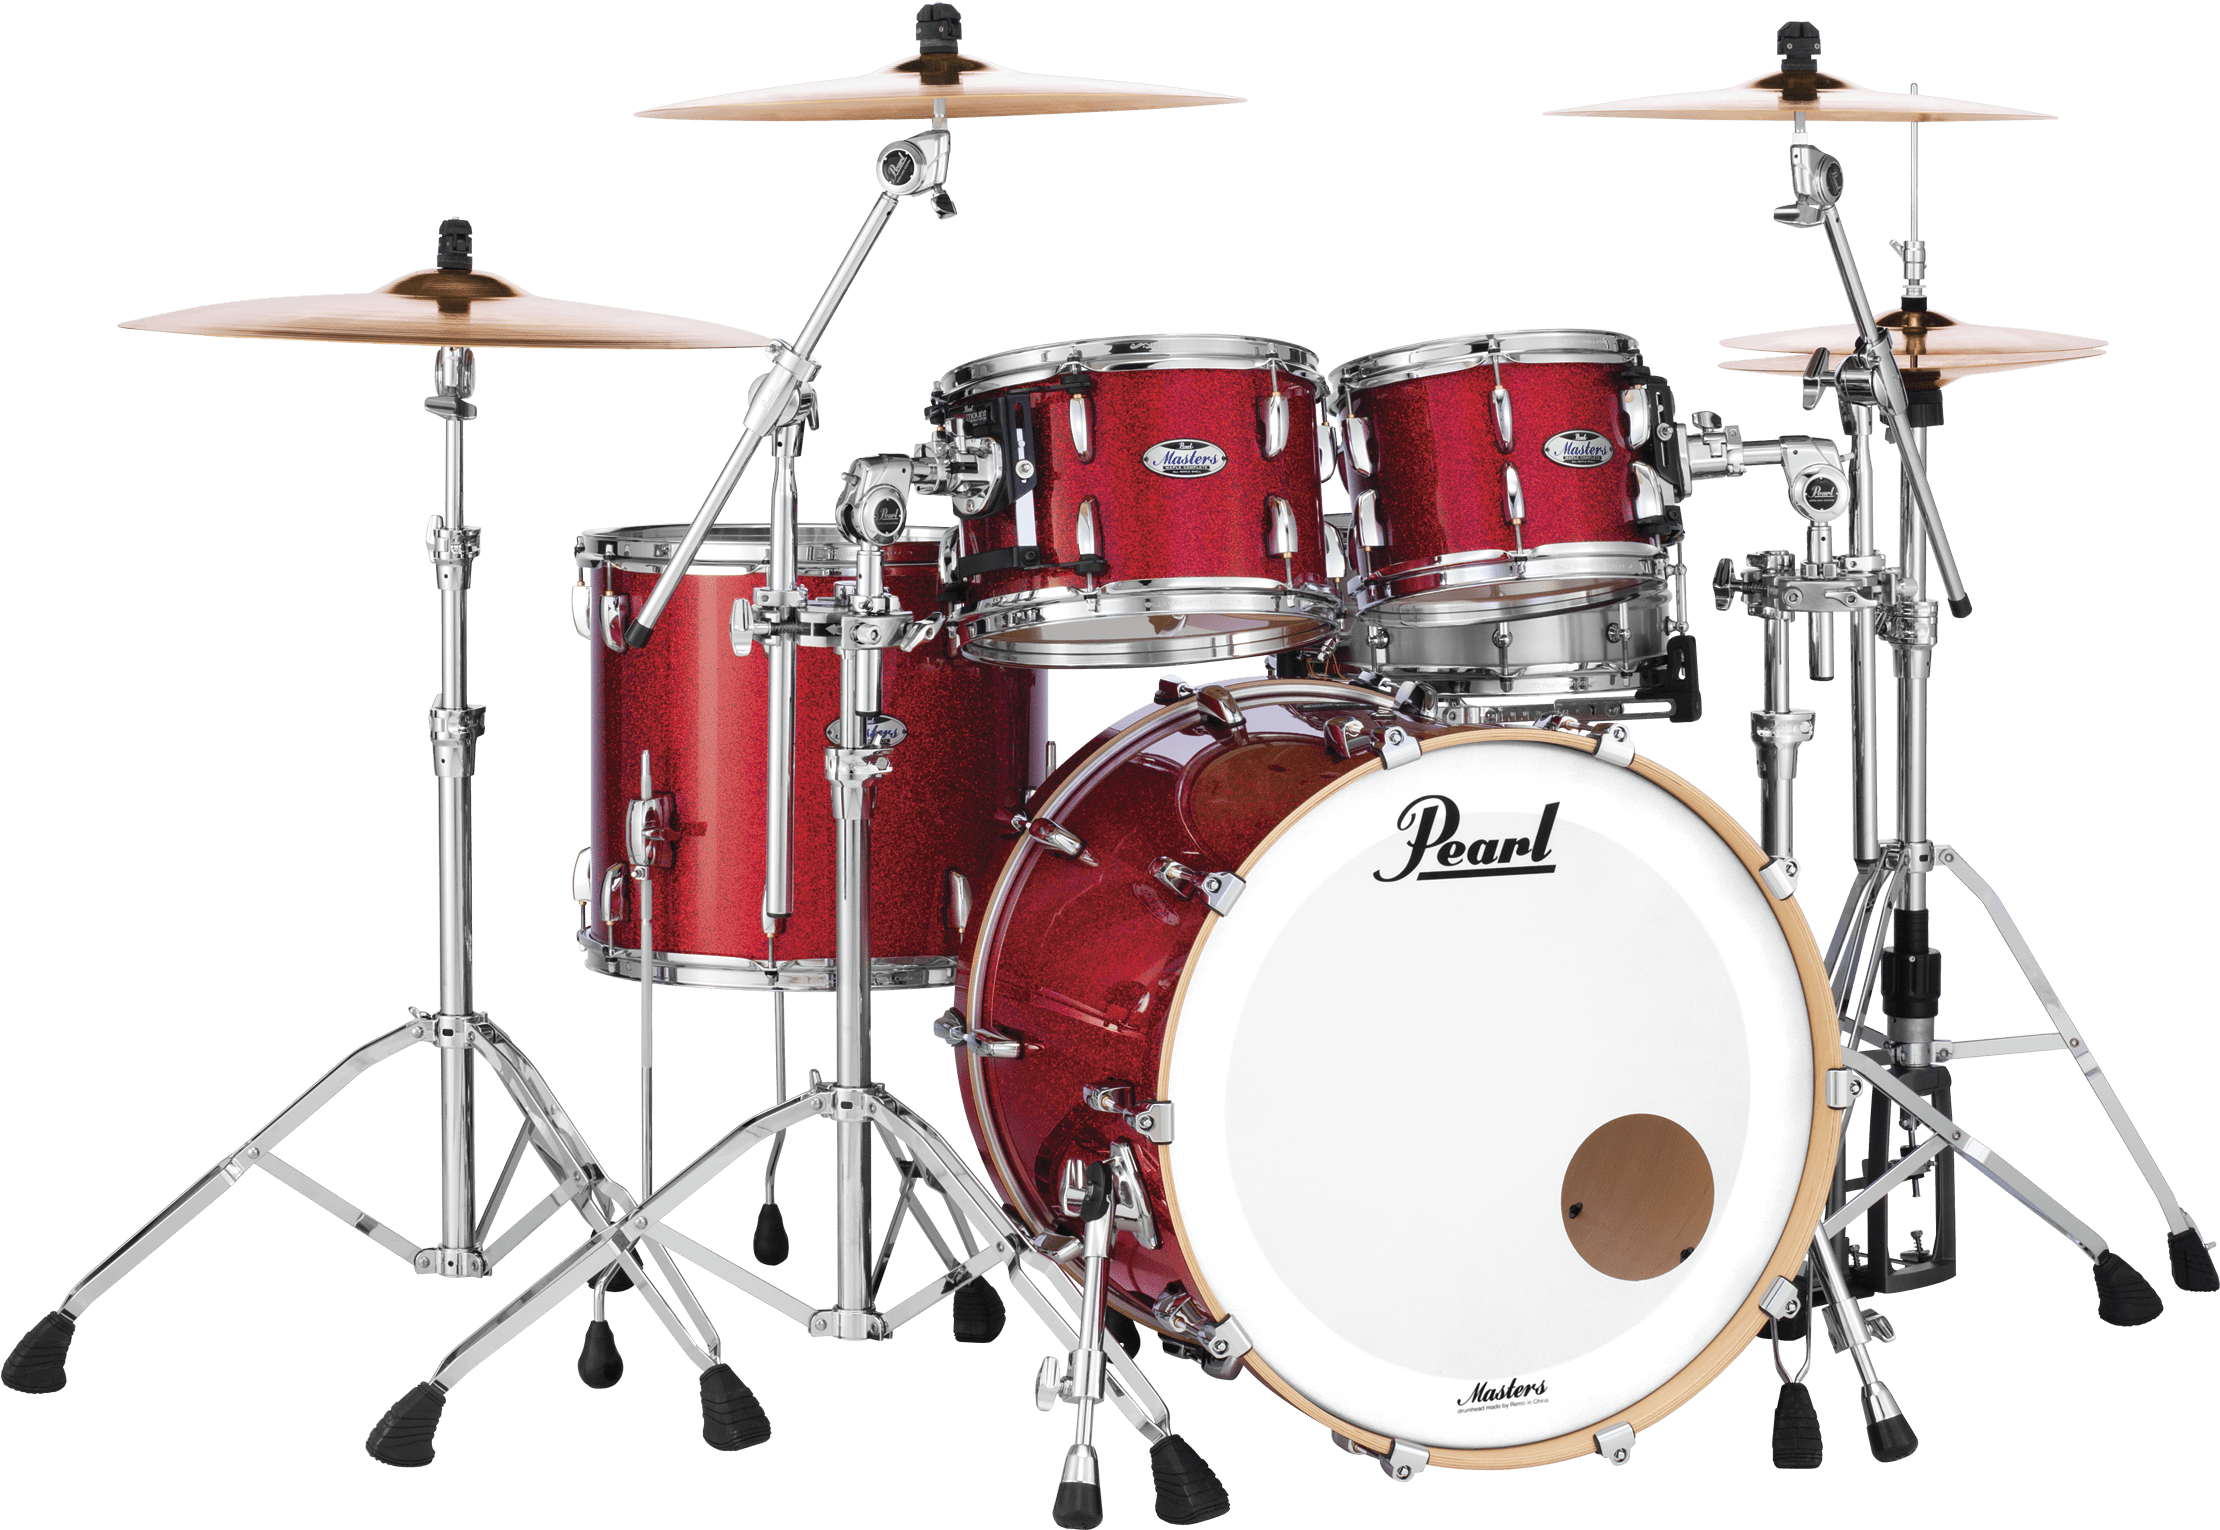 A Red Drum Set With Black Background